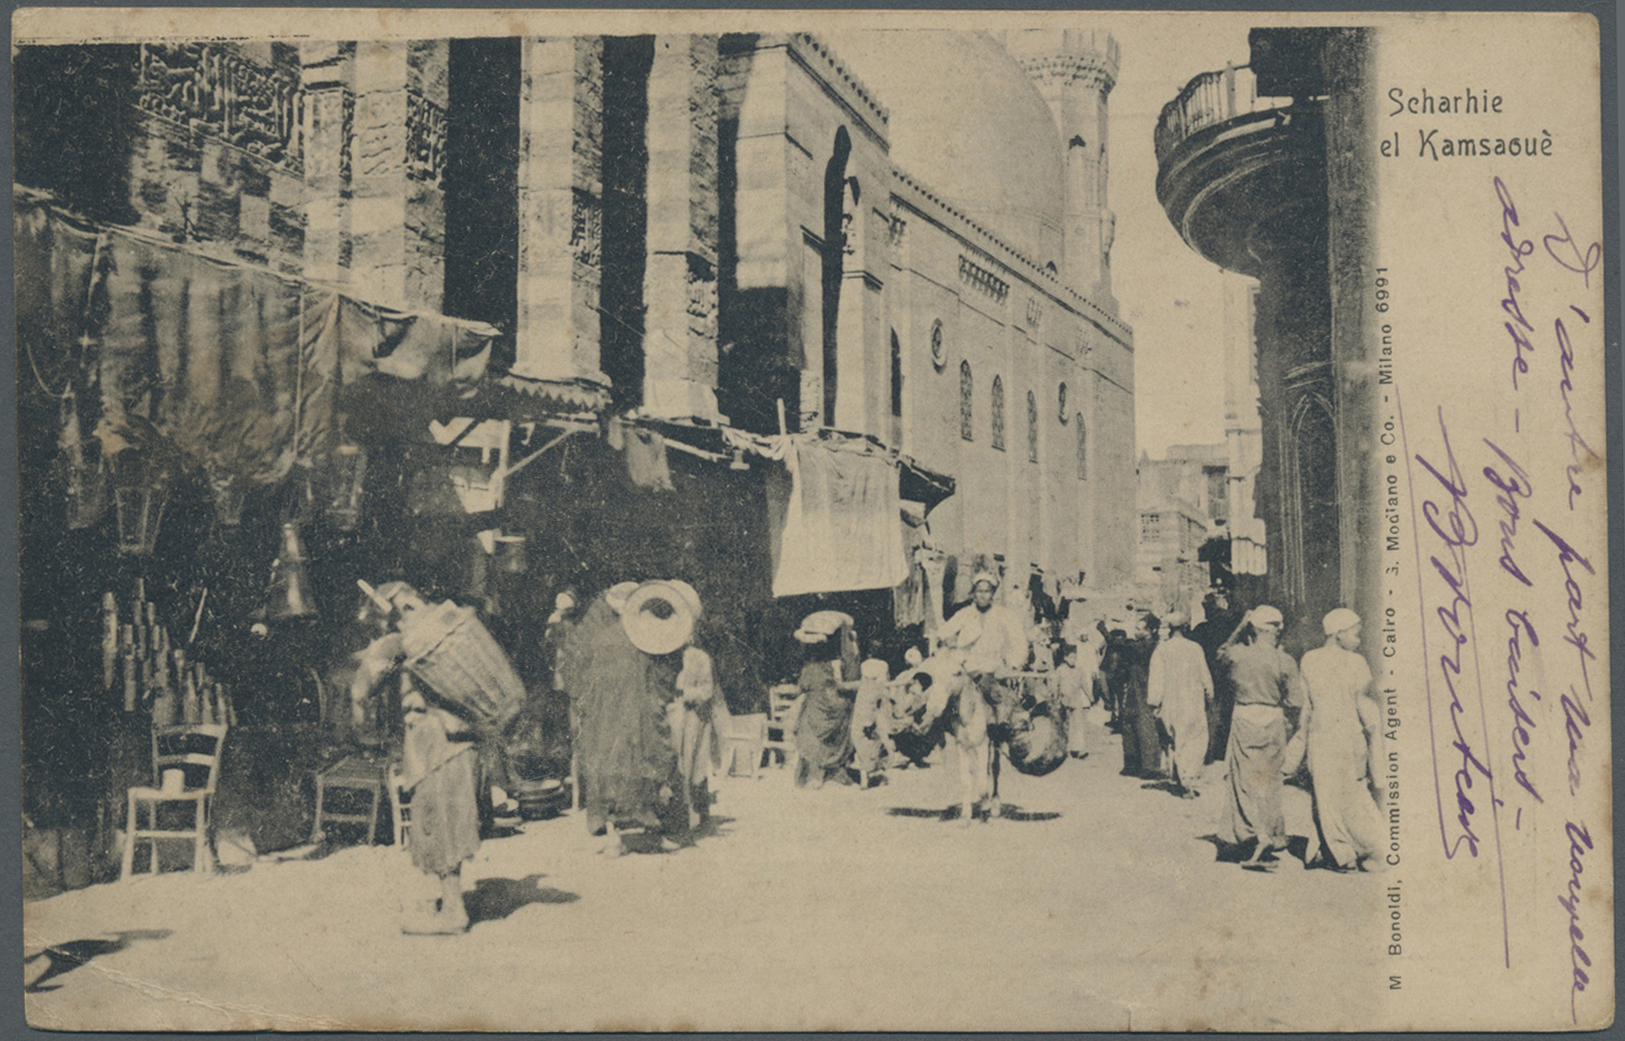 Br Ägypten: 1917. Picture Post Card Of 'Kamsaoue Market' Endorsed '3rd Group, 9th Art Afrique Mission, Sectour Postal 60 - 1915-1921 British Protectorate